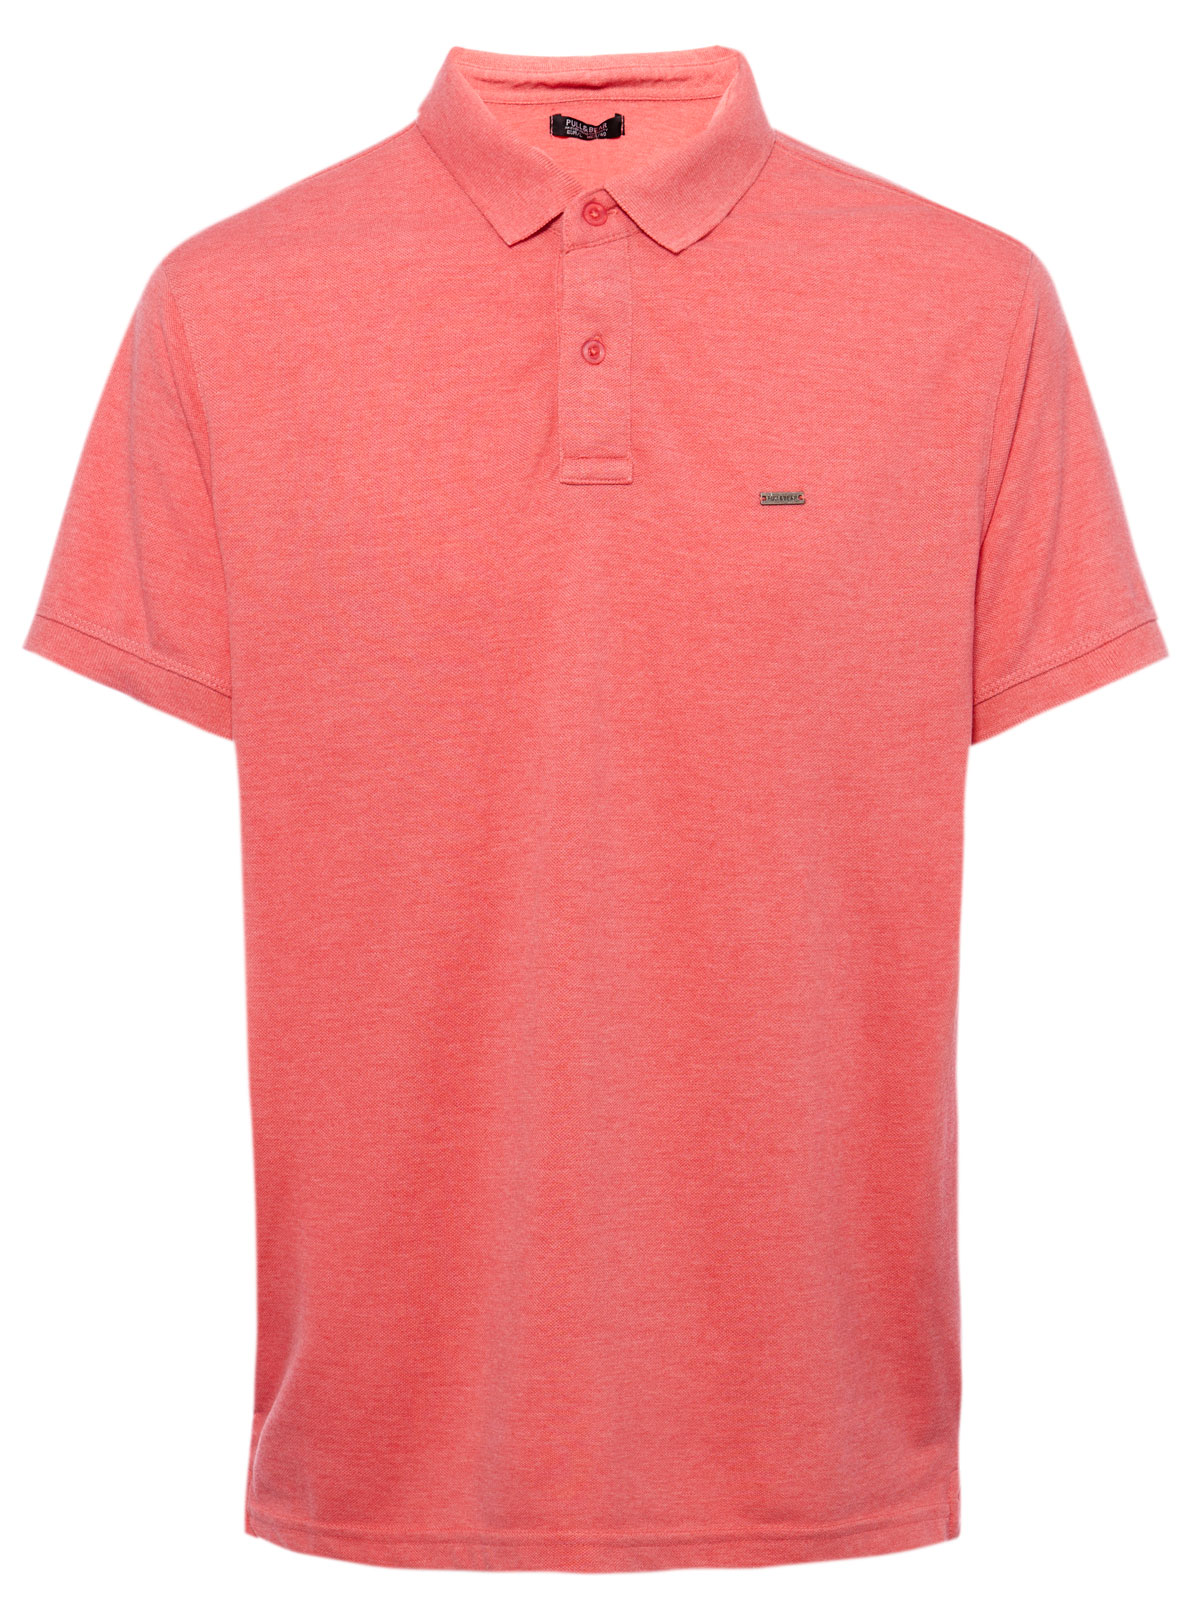 Pull&bear Polo Shirt in Pink for Men | Lyst